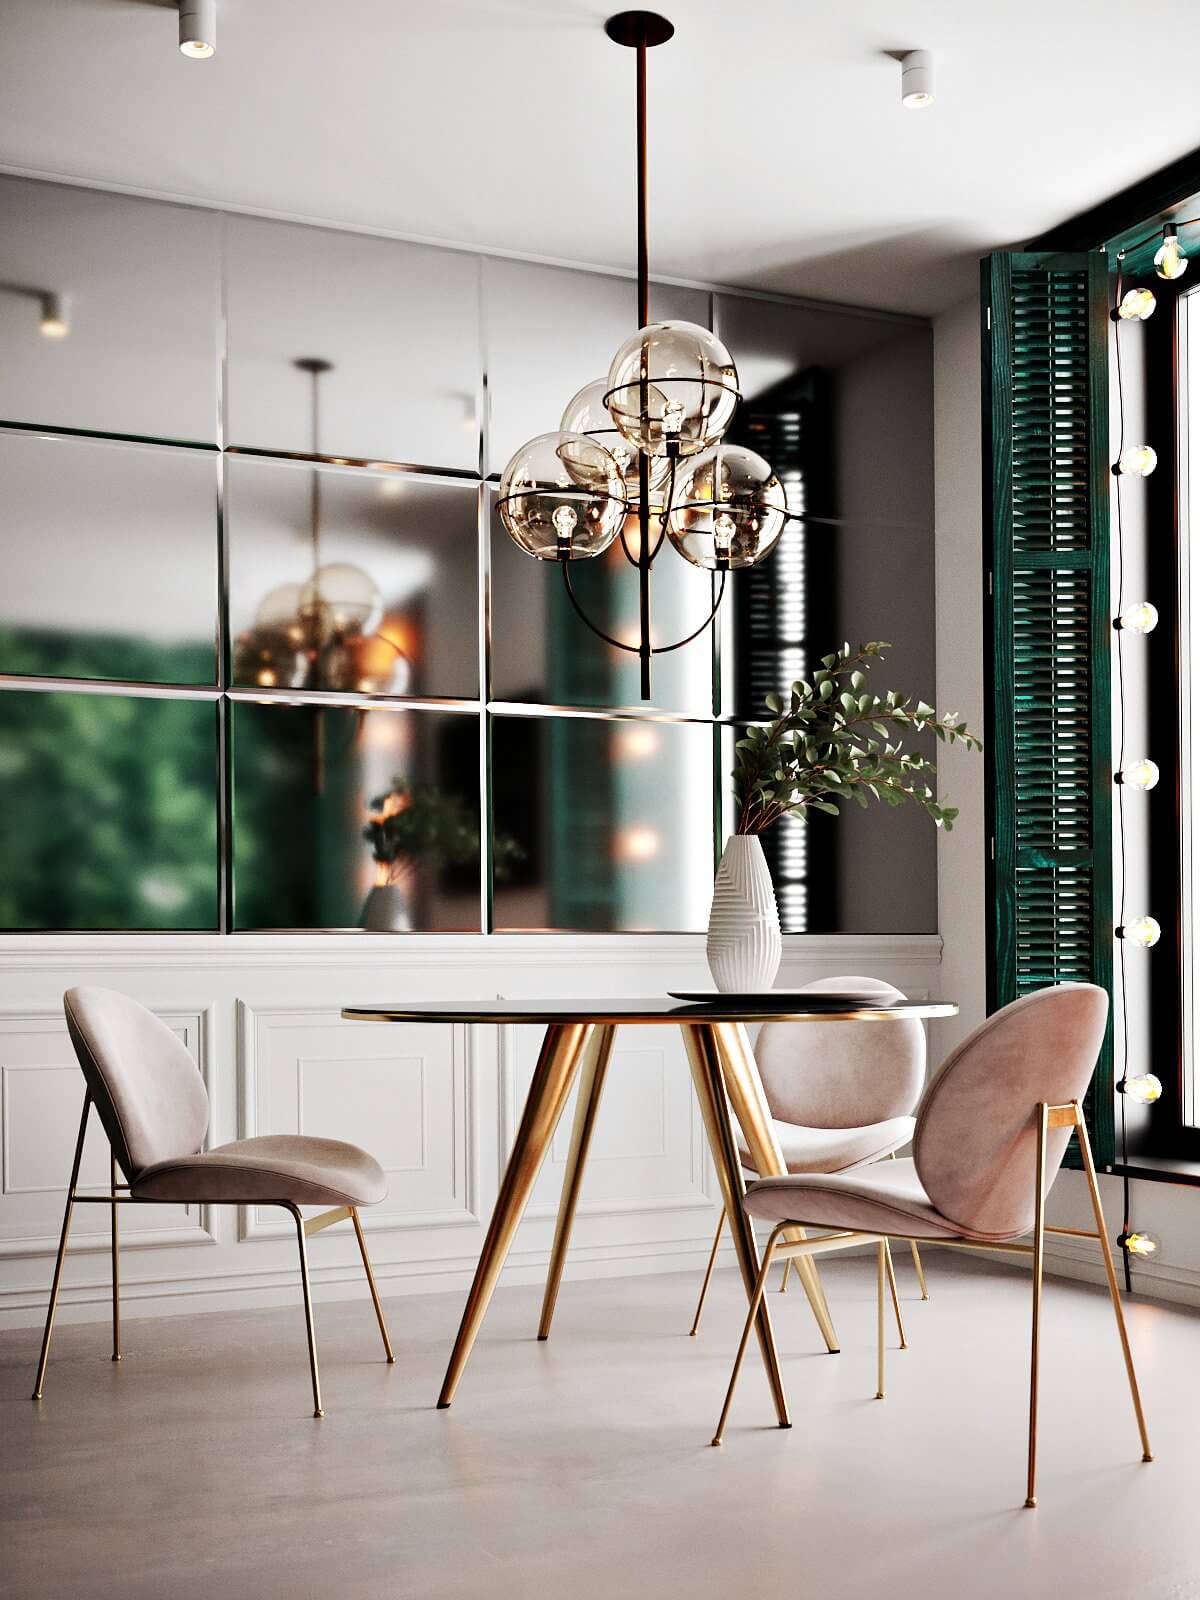 New York concept house dining table - cgi visualization